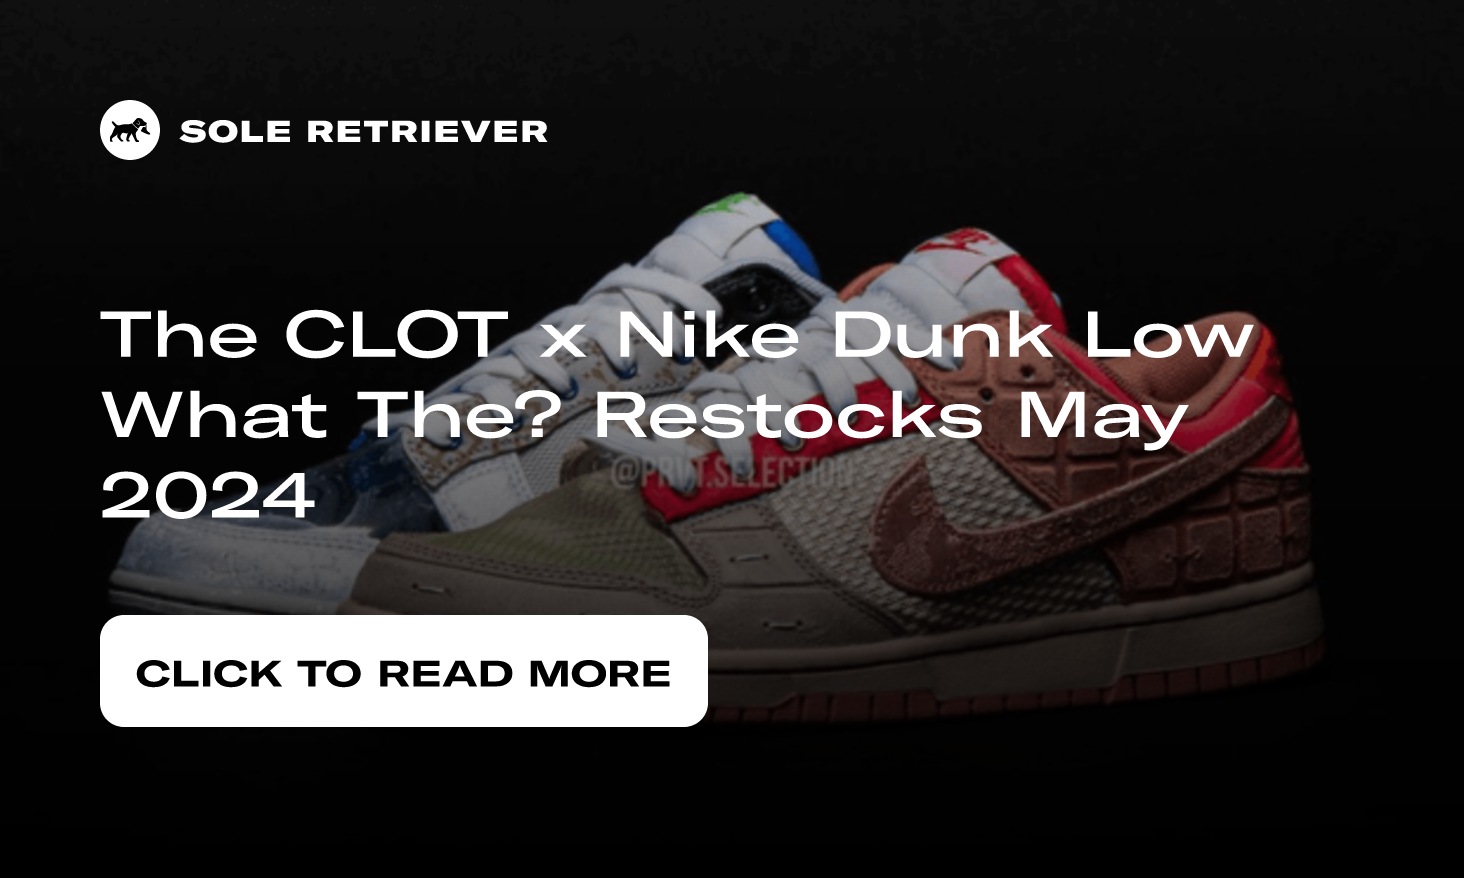 The CLOT x Nike Dunk Low What The? Restocks May 2024